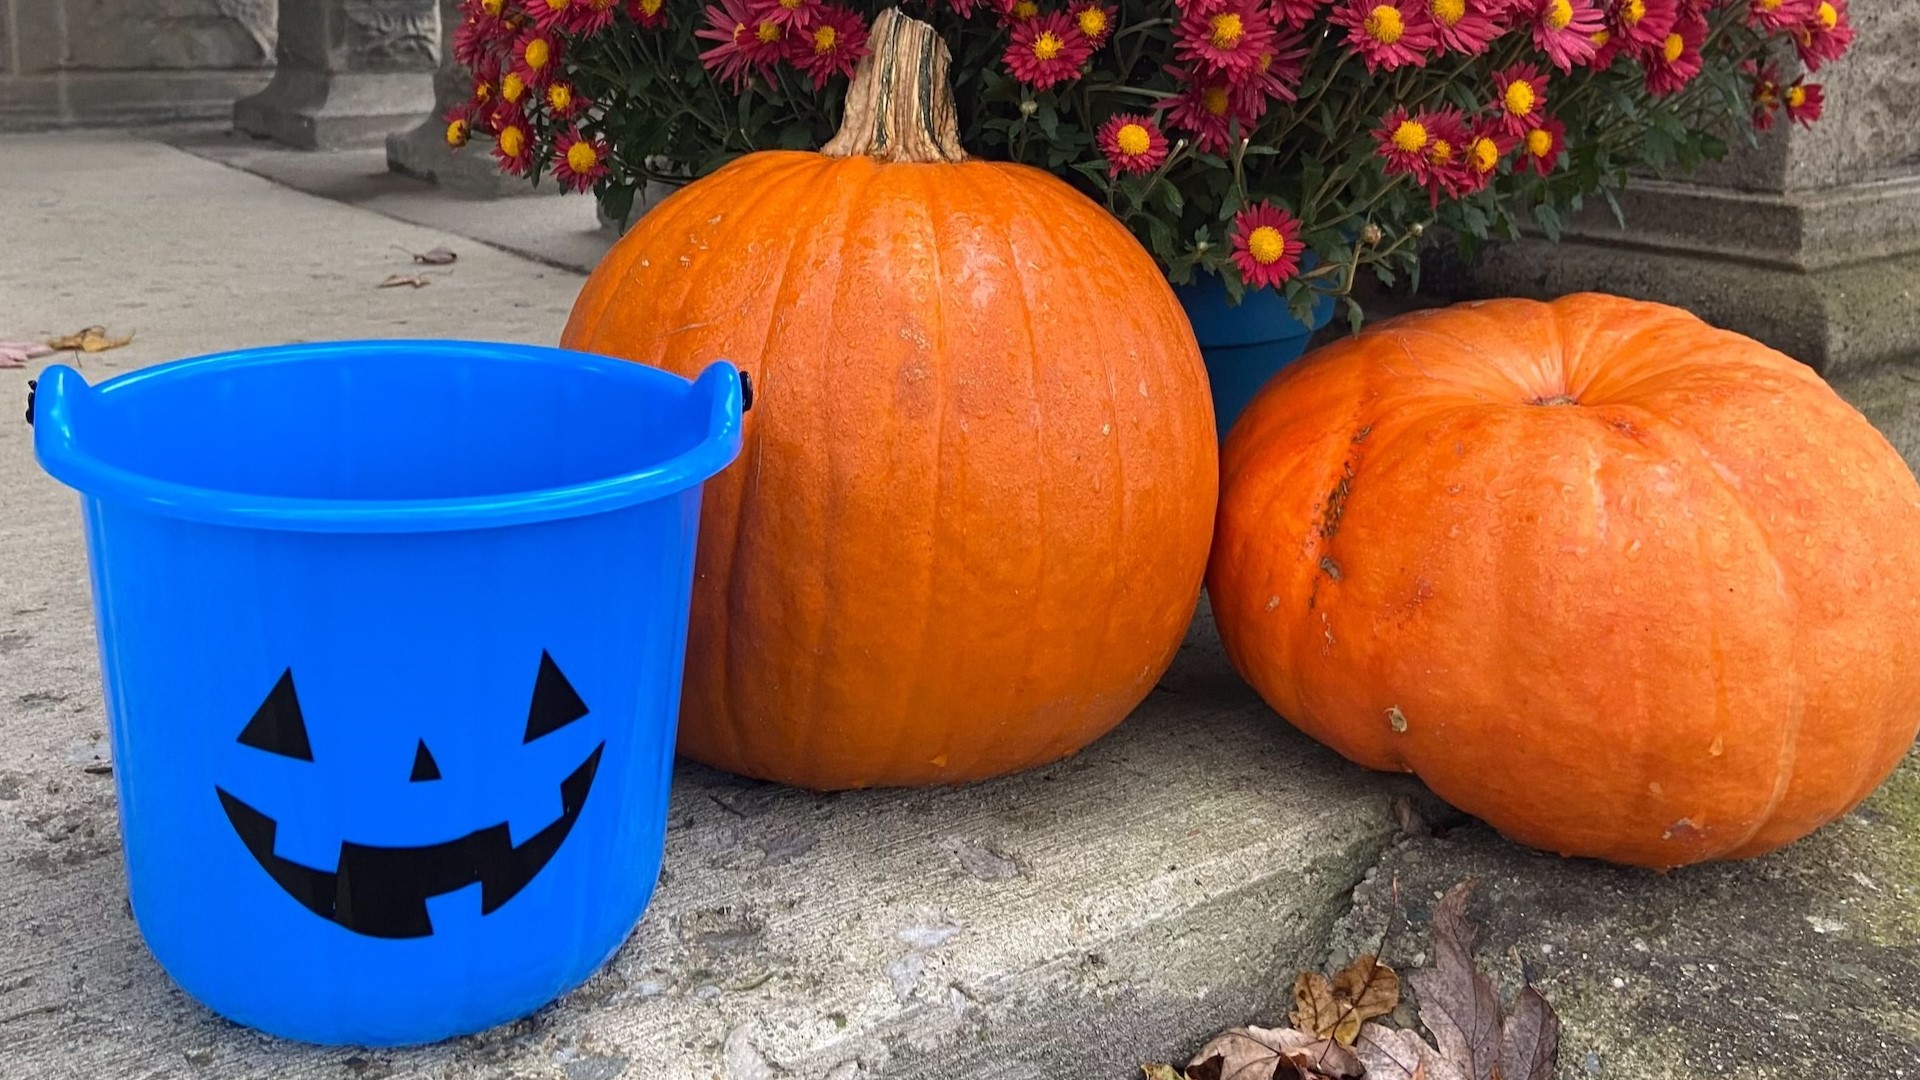 Central Ohio children are preparing for a night of trick-or-treating while some parents are reminding others about various abilities among children.